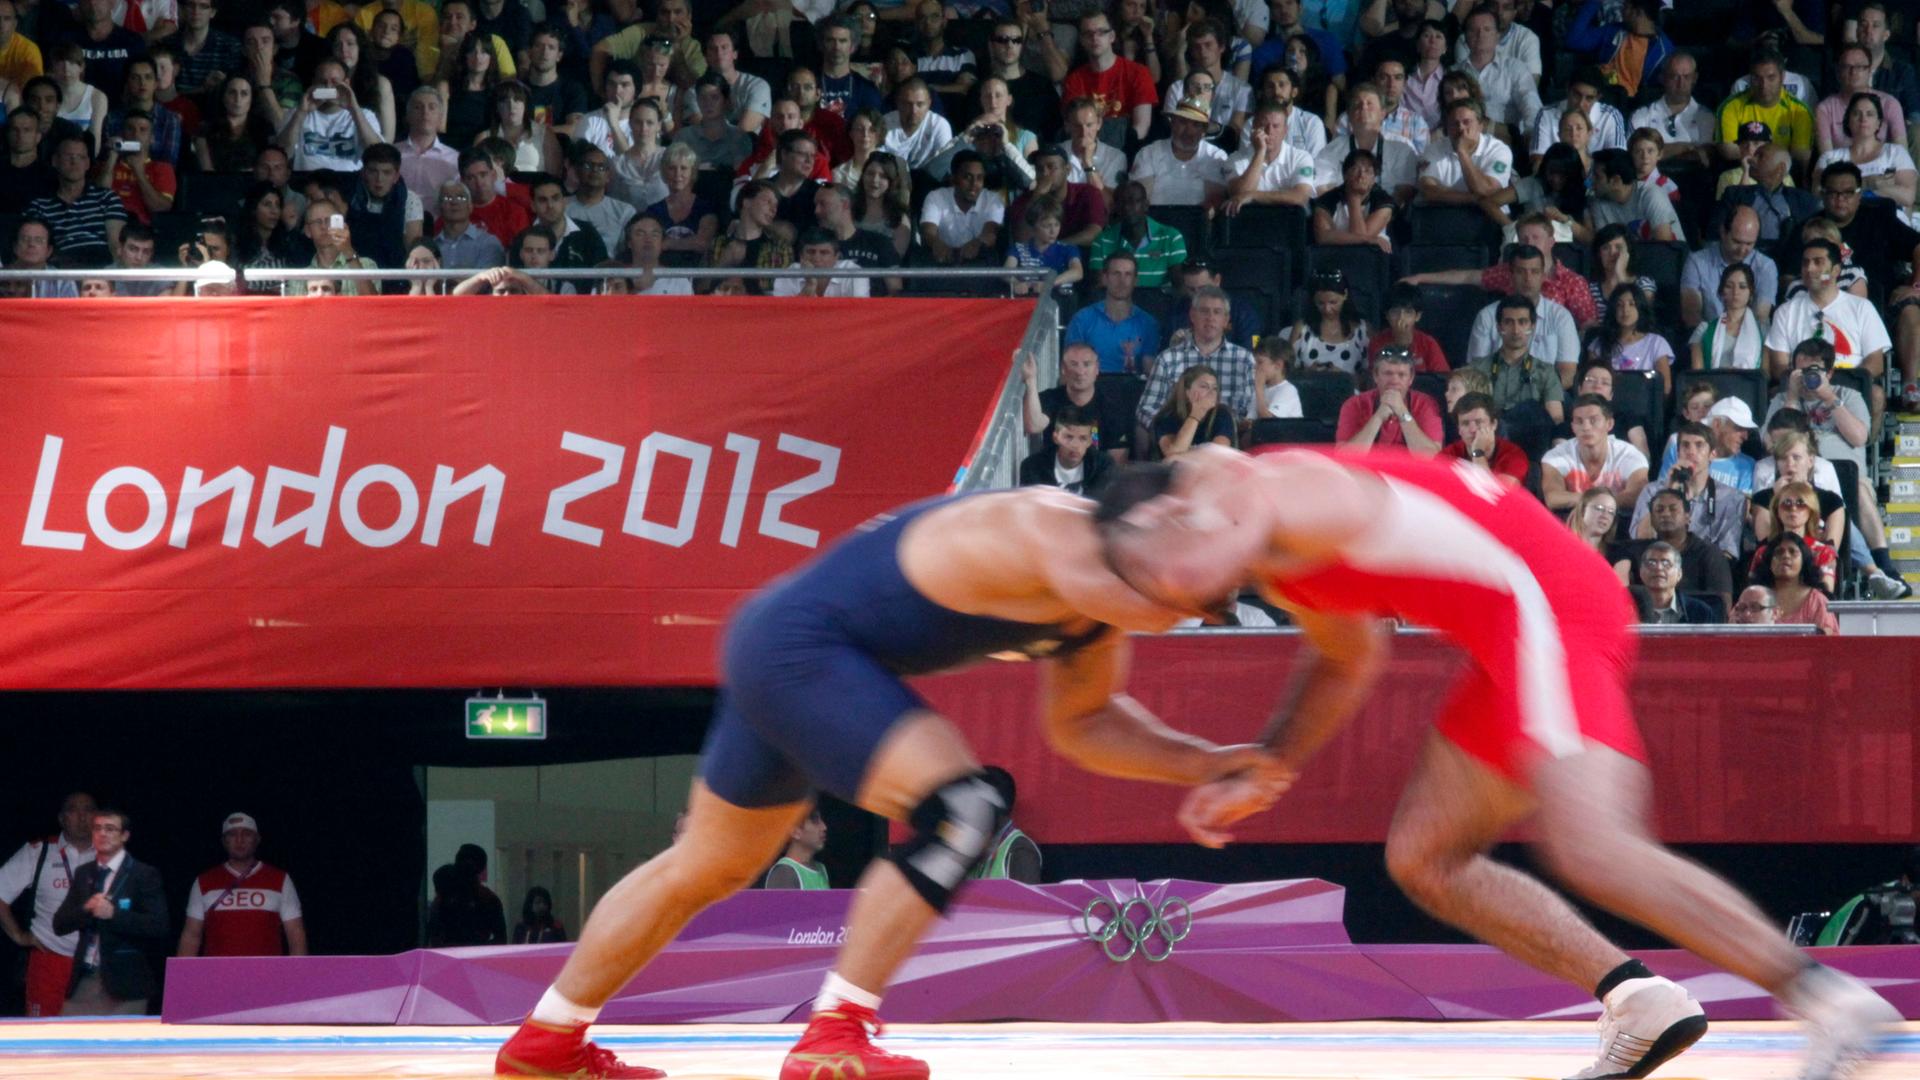 Kurban Kurbanov (red) from Uzbekistan fights George Gogshedidze of Georgia in the bronze medal match in the Men's 96kg Freestyle Wrestling during the London 2012 Olympic Games in London, Britain 12 August 2012. EPA/JIM HOLLANDER